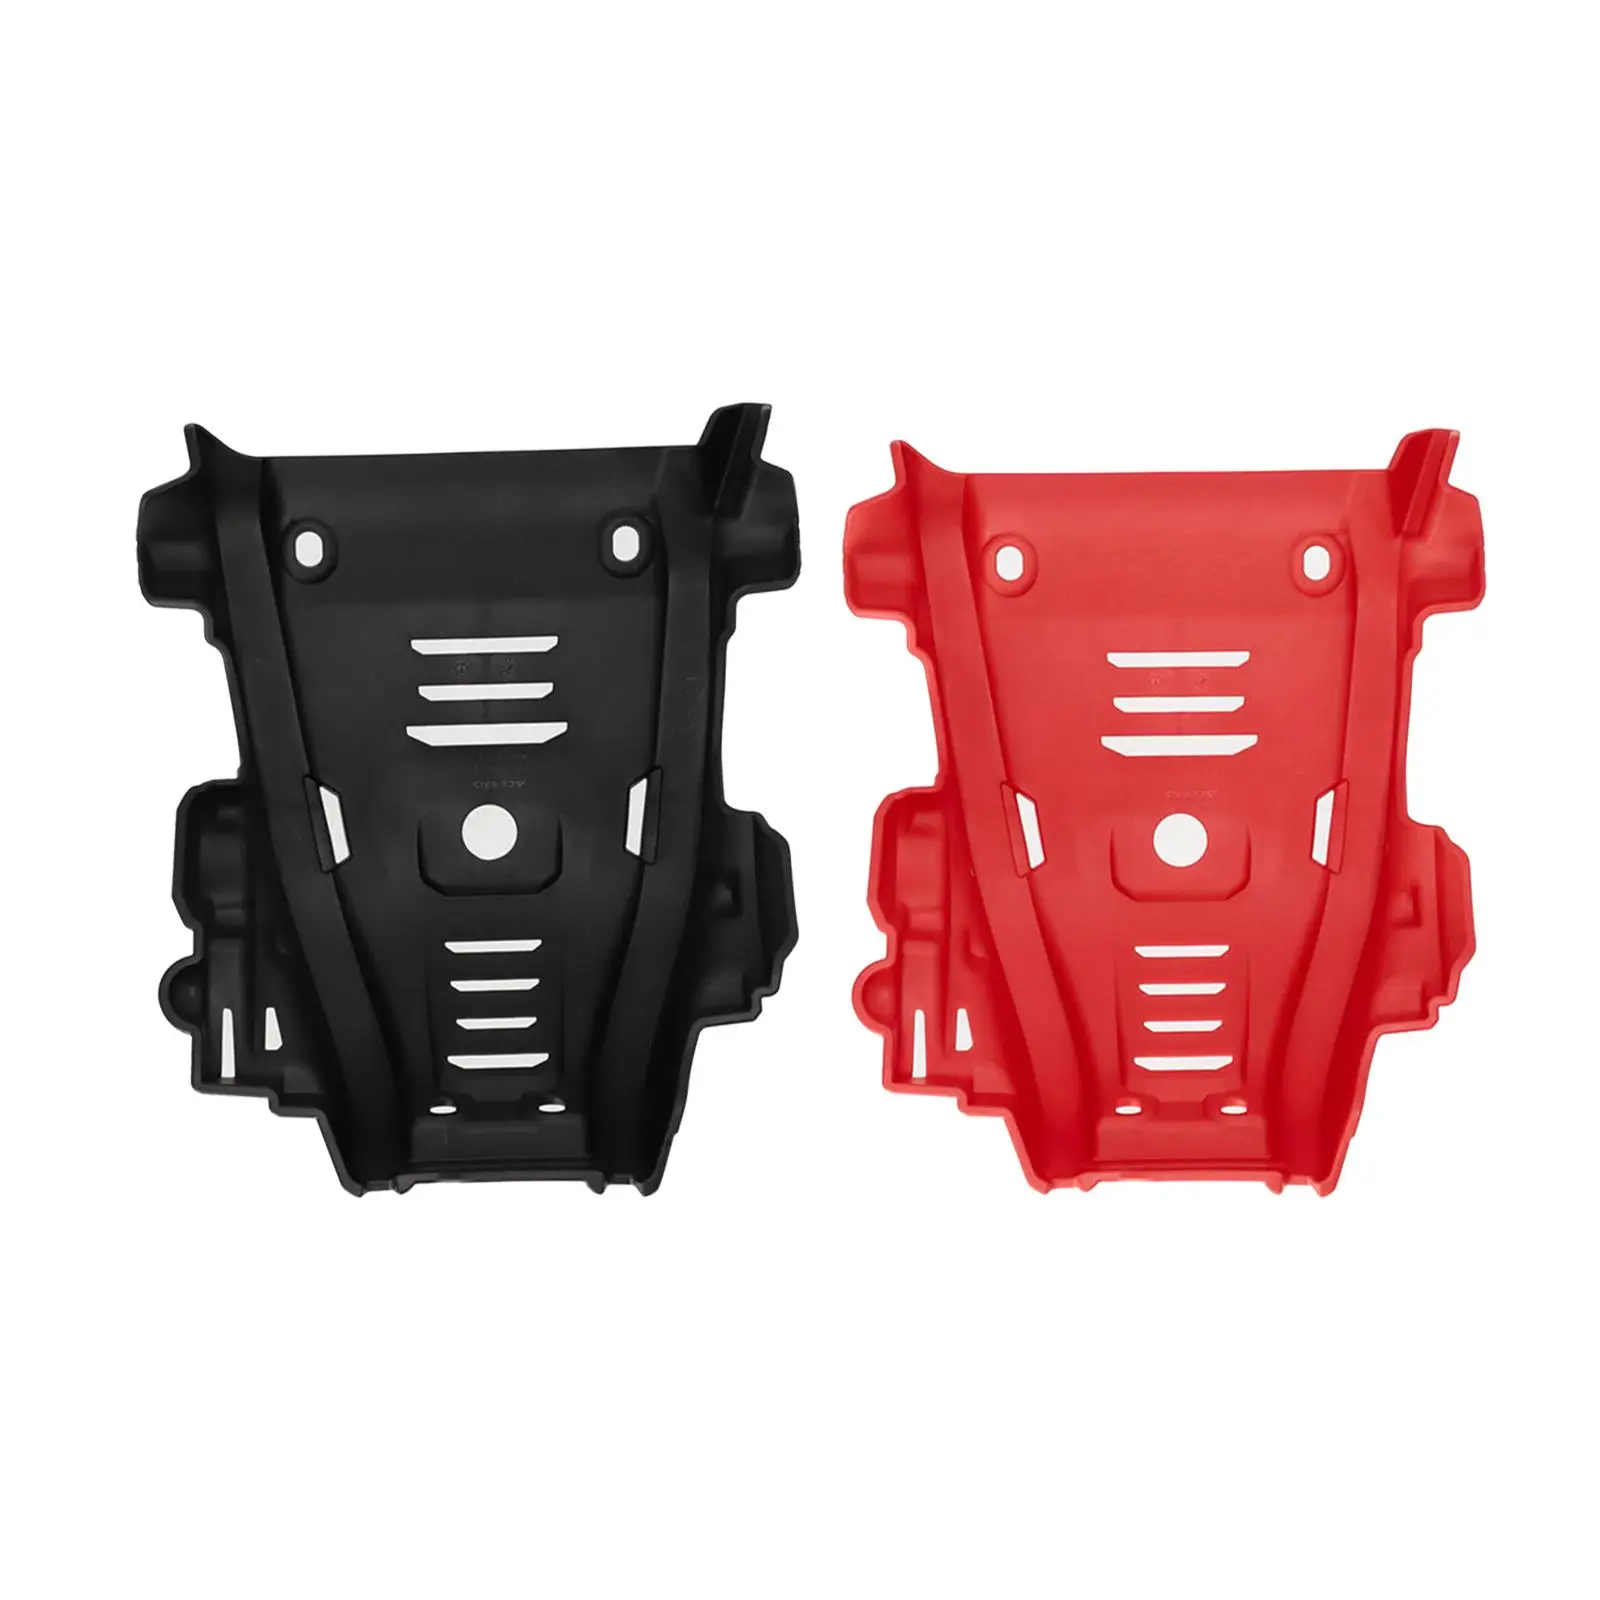 Engine Chassis Guard Plate Protection Cover for Crf300L Supplies Easy to Install